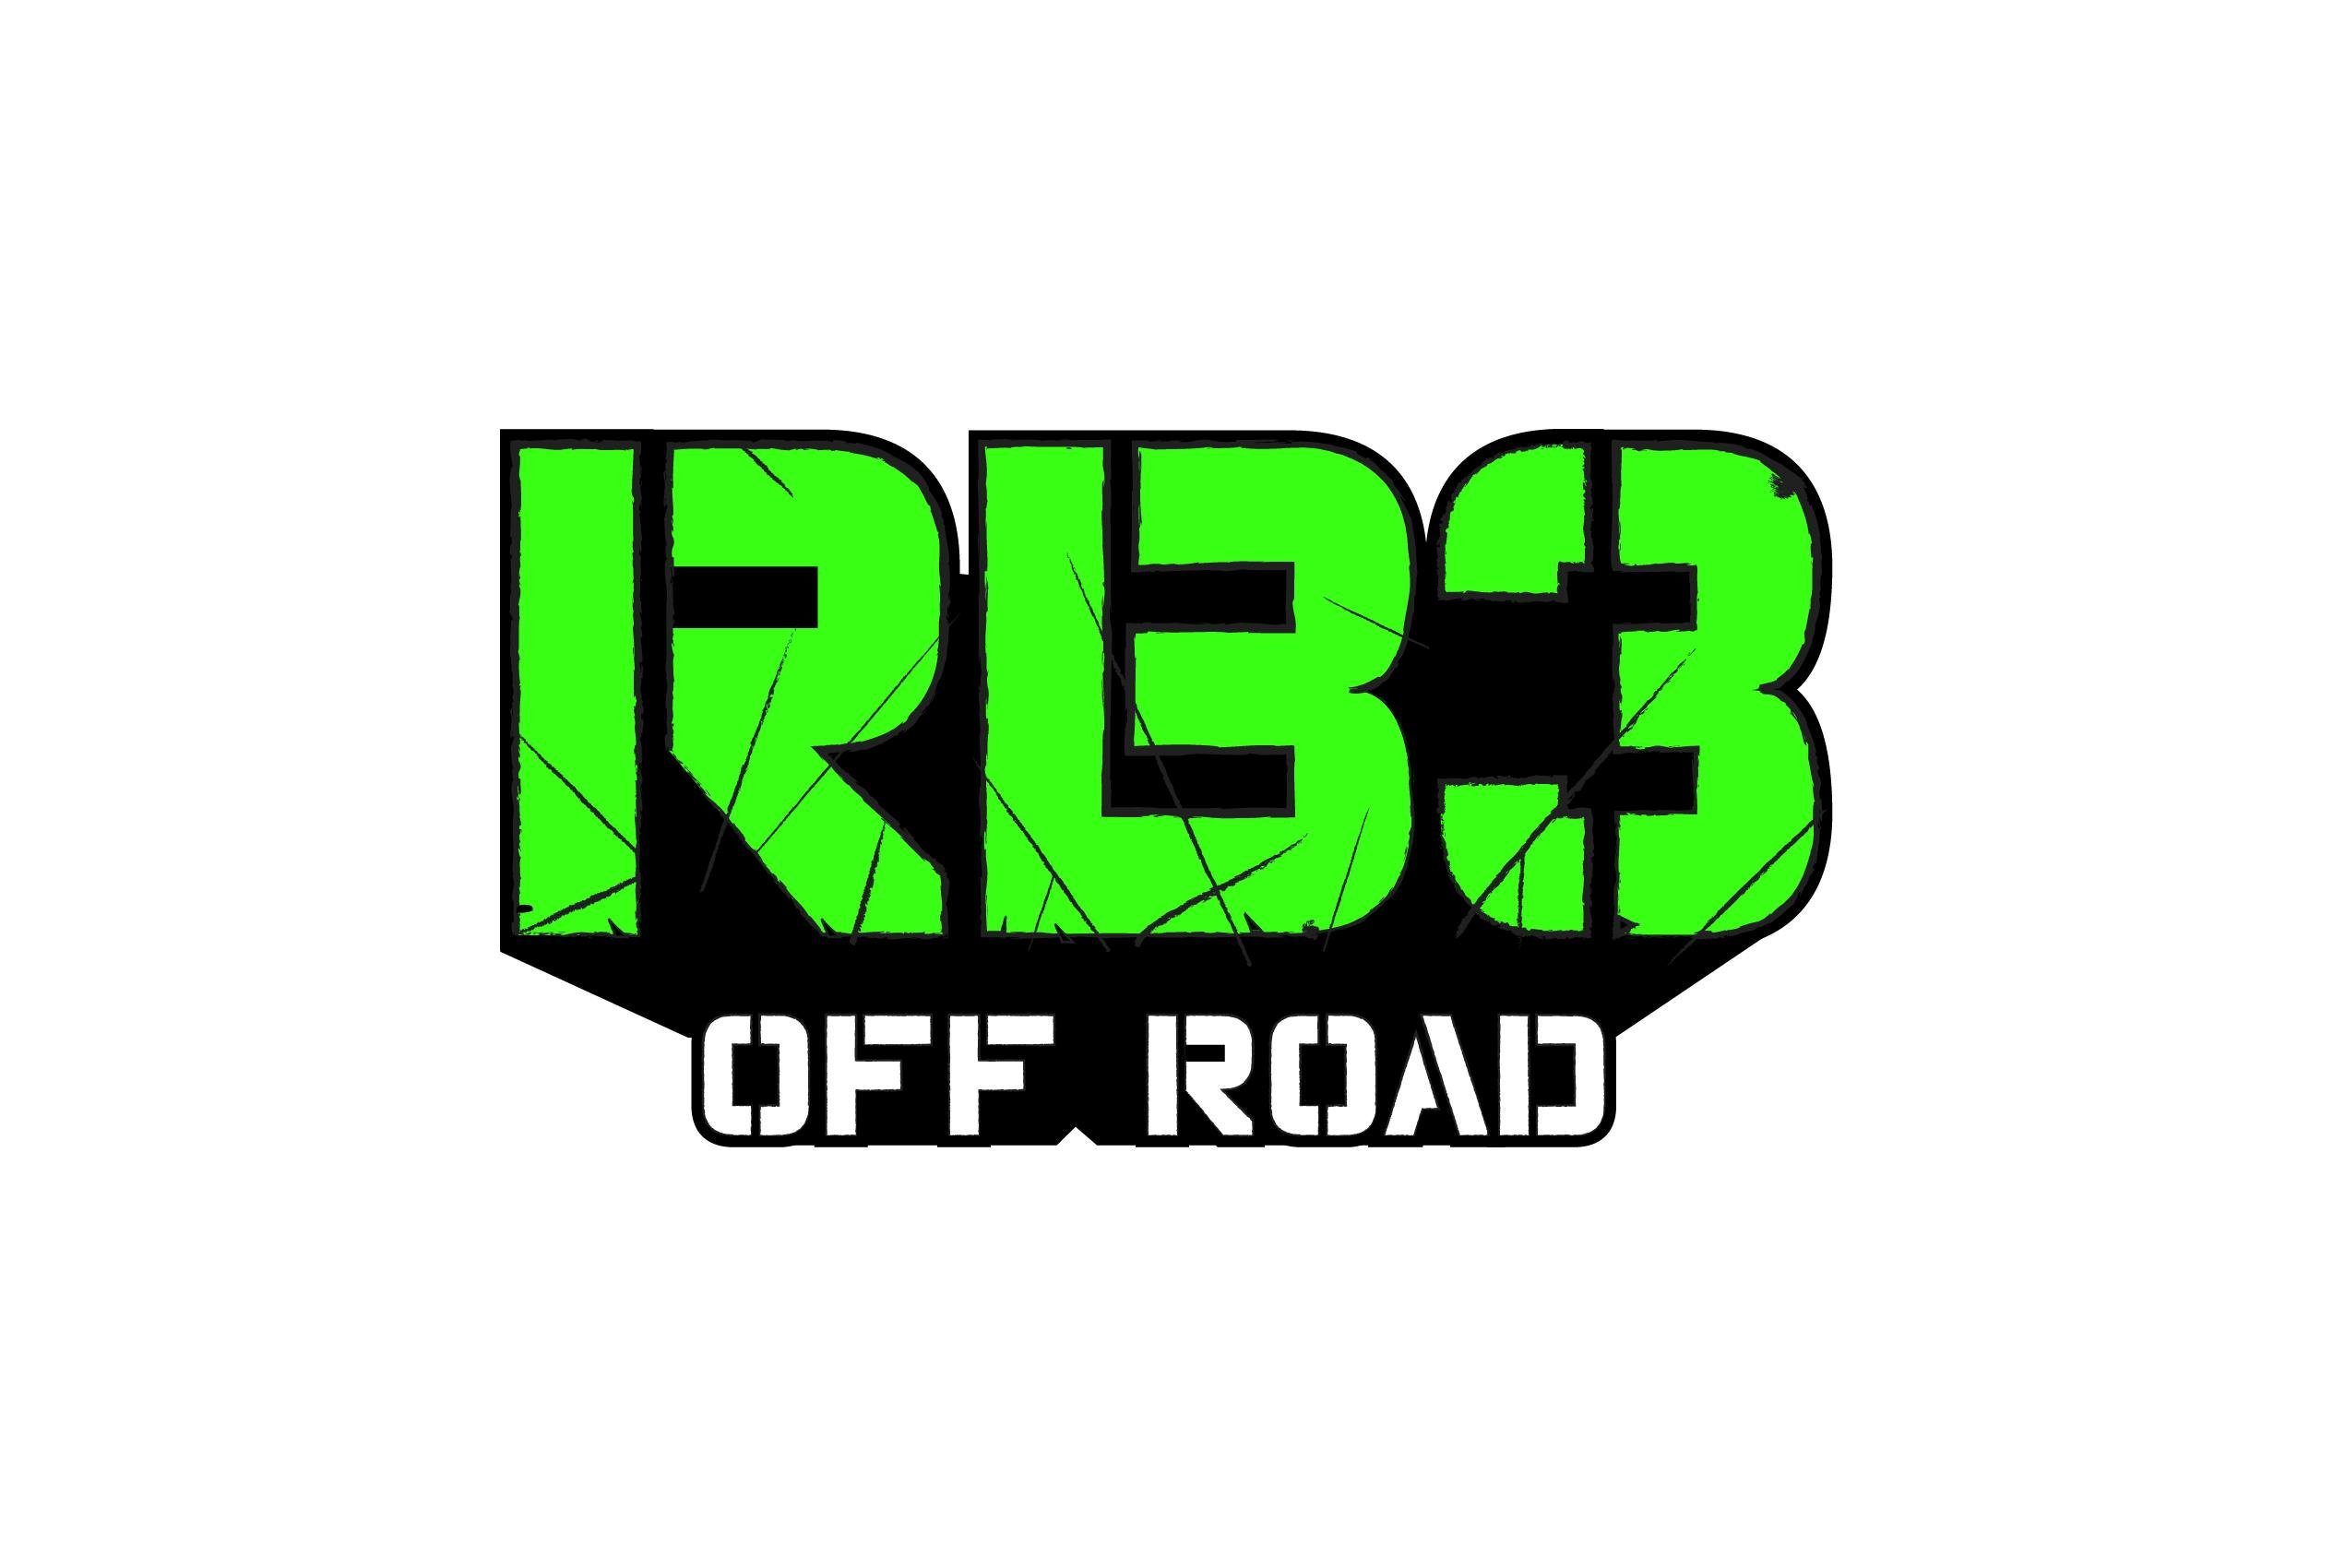 RB3 provides Side by Side Offroad products at https://t.co/xqTpbLzEtP